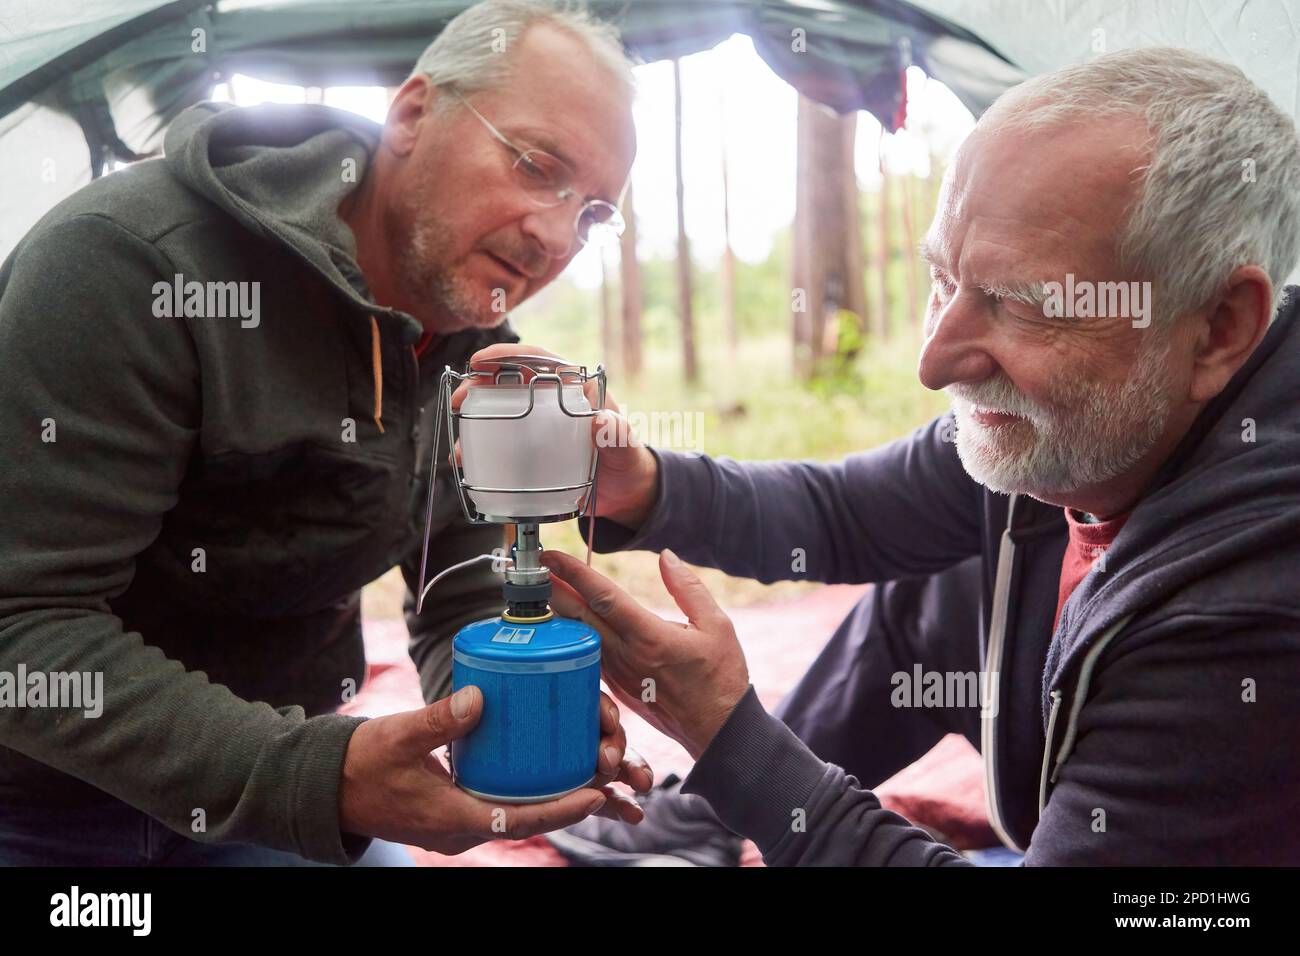 Elderly man fixing burner on stove with male friend while camping in tent during vacation Stock Photo